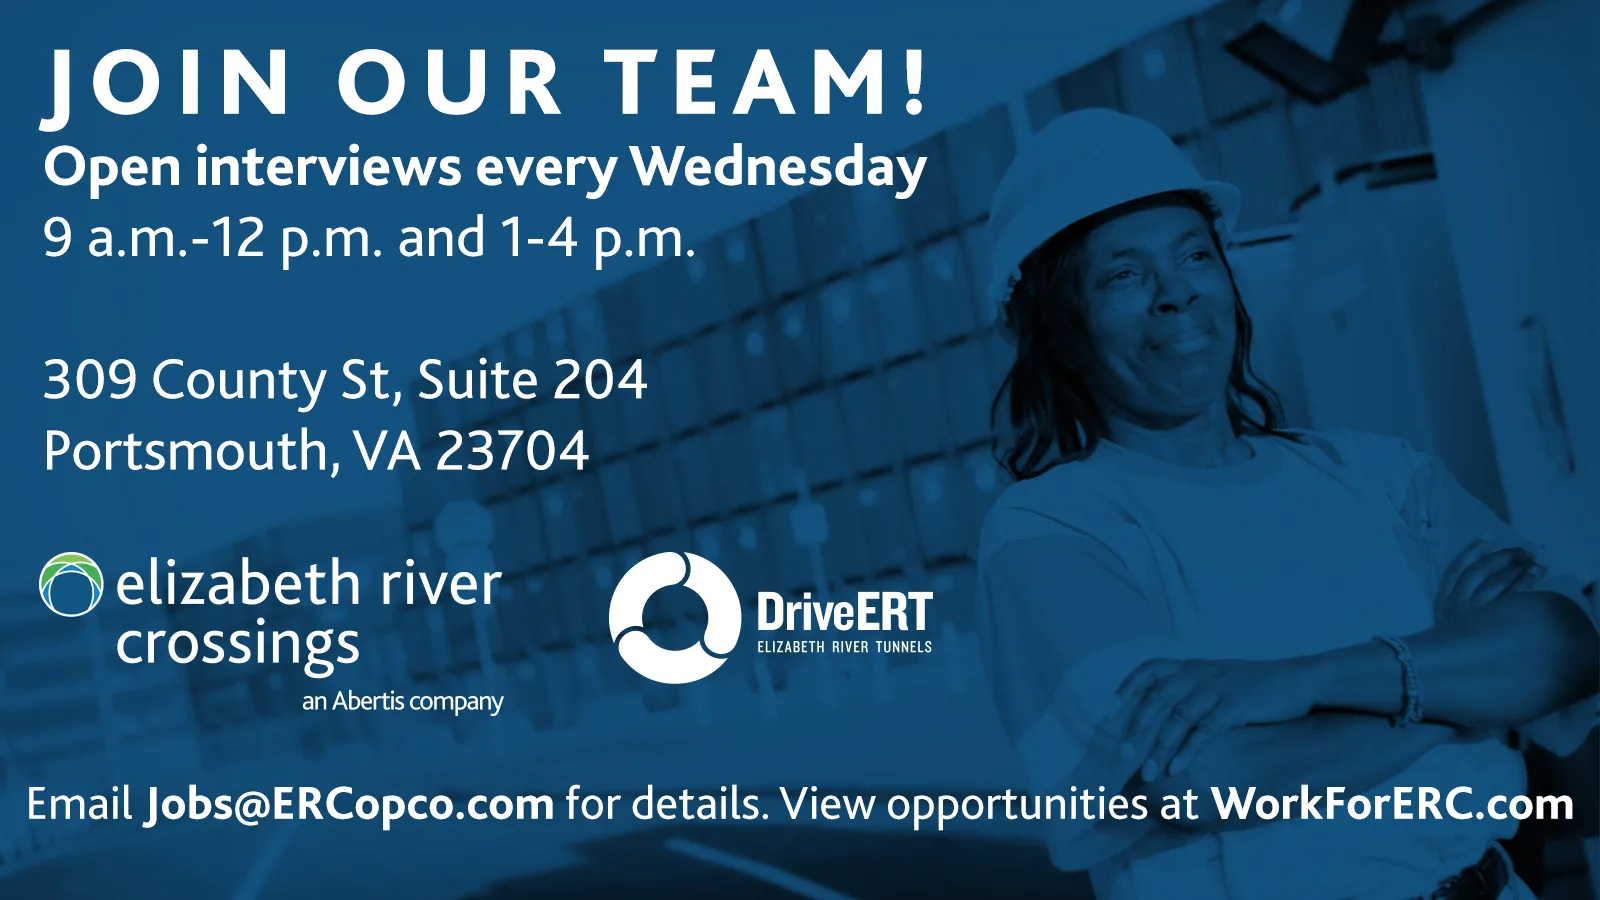 Open Interviews for jobs at Elizabeth River Crossings!